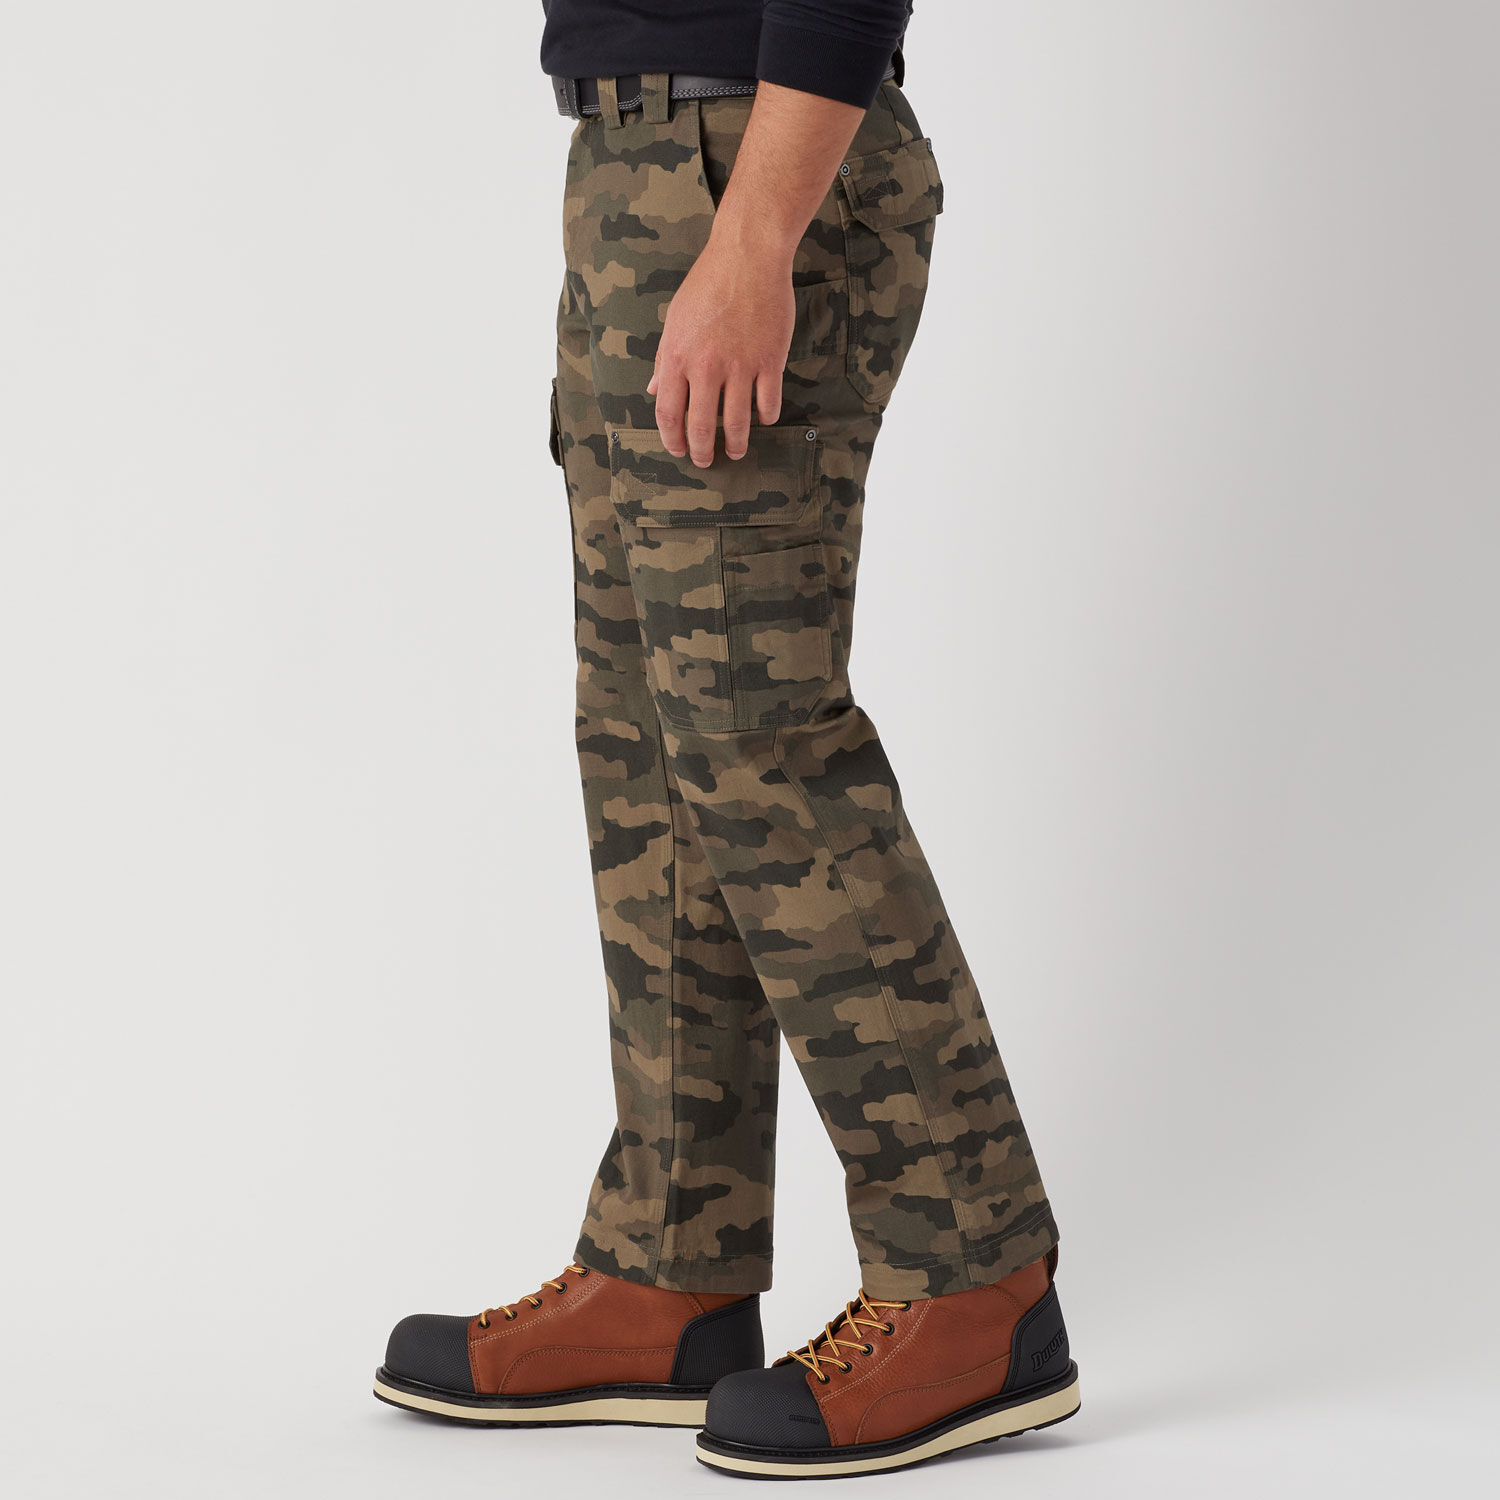 NWT Boy's Old Navy Camouflage Pants - Relaxed Slim Fit - XL 14/16 |  eBay